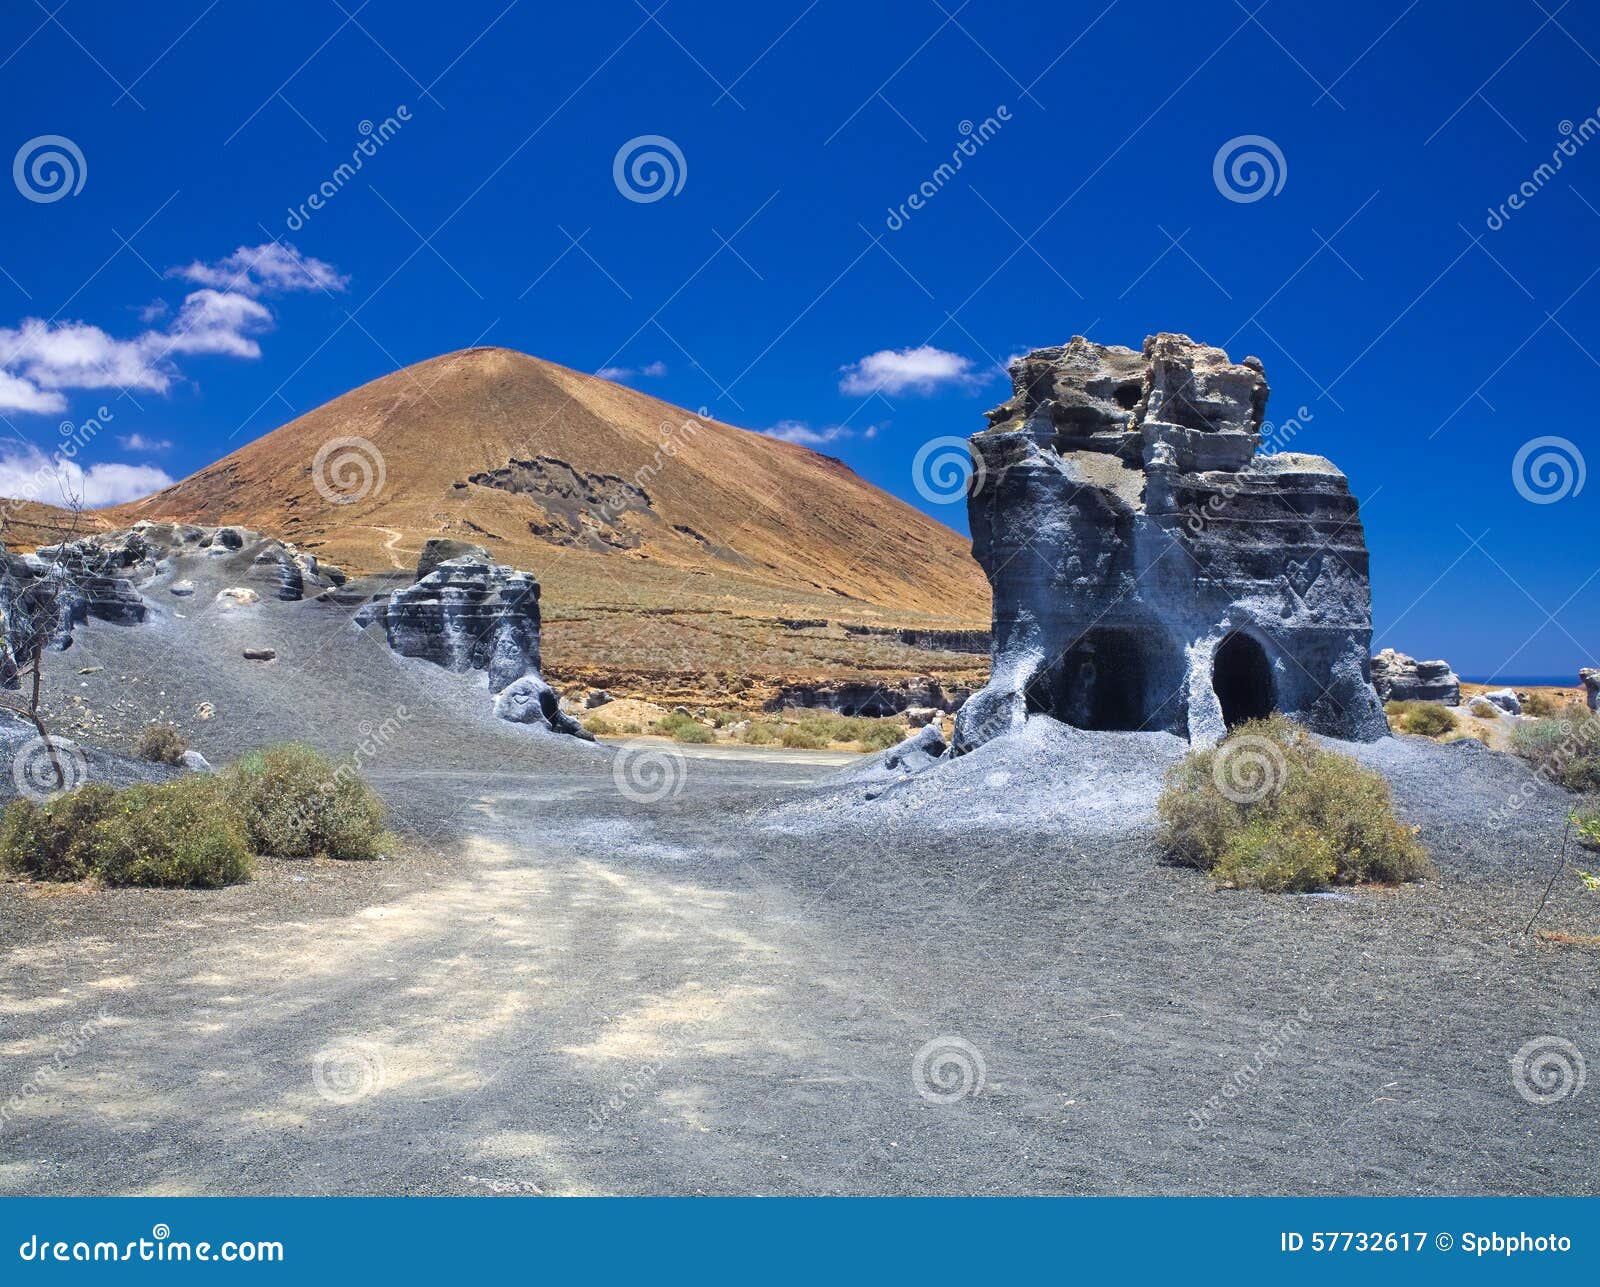 erosion weathering blue rock formations plano de el mojon against the background of a volcanic cone, blue sky